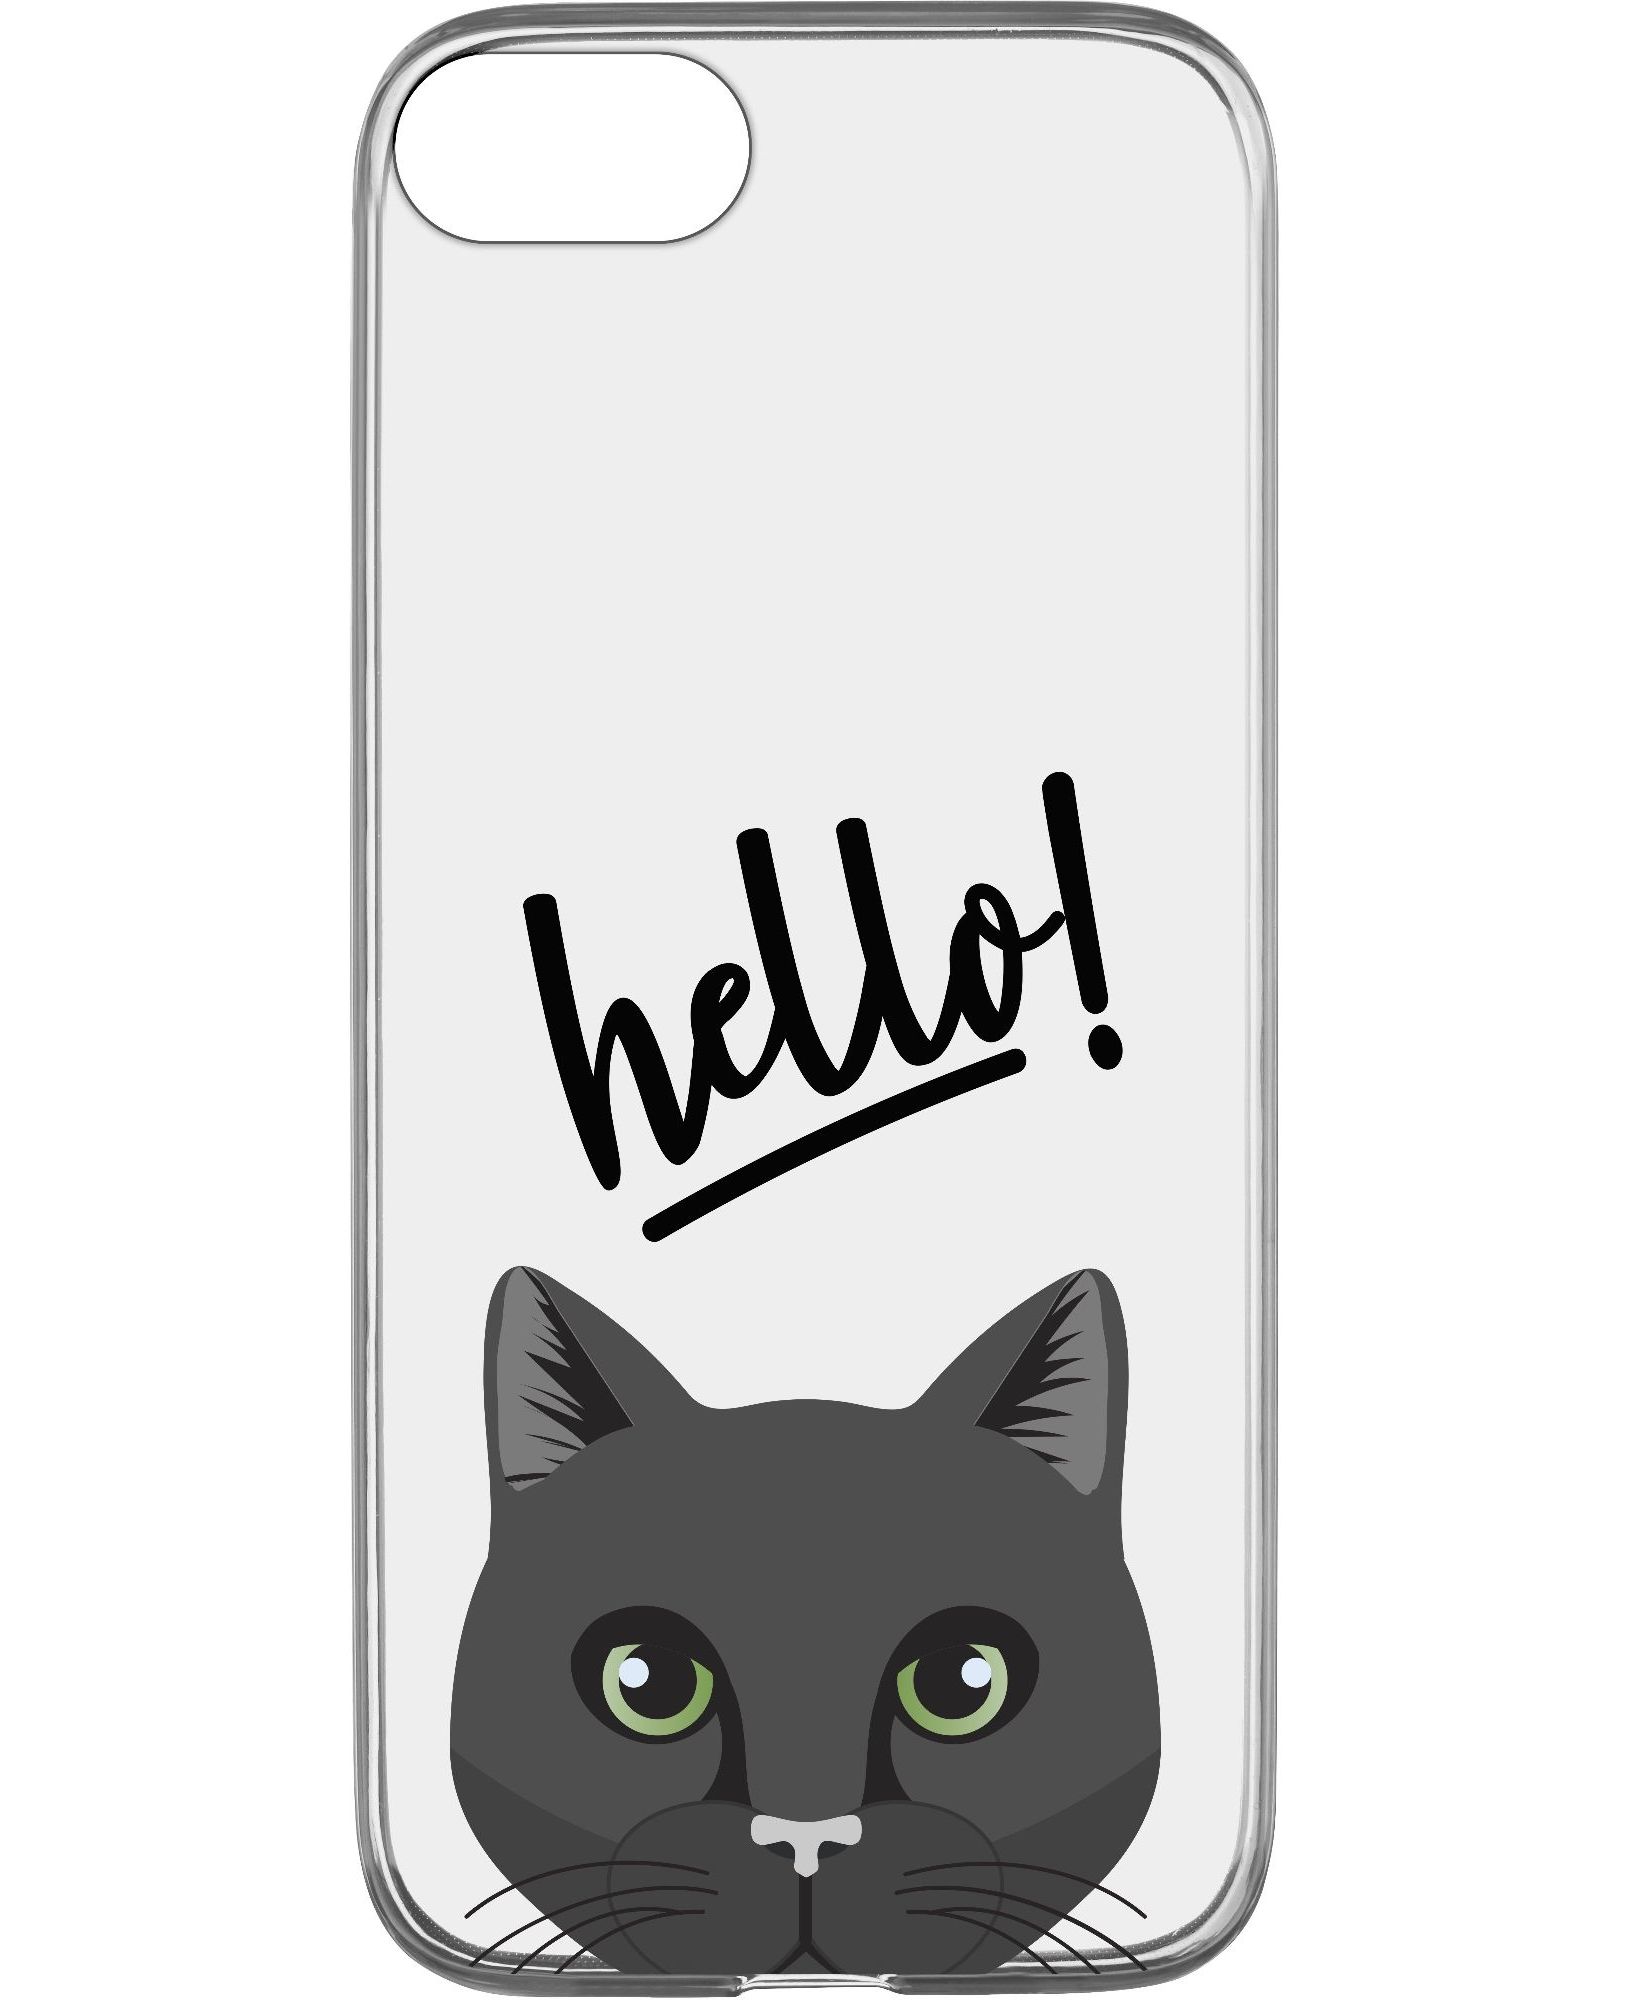 iPhone SE (2020)/8/7/6s/6, case style, hello cats